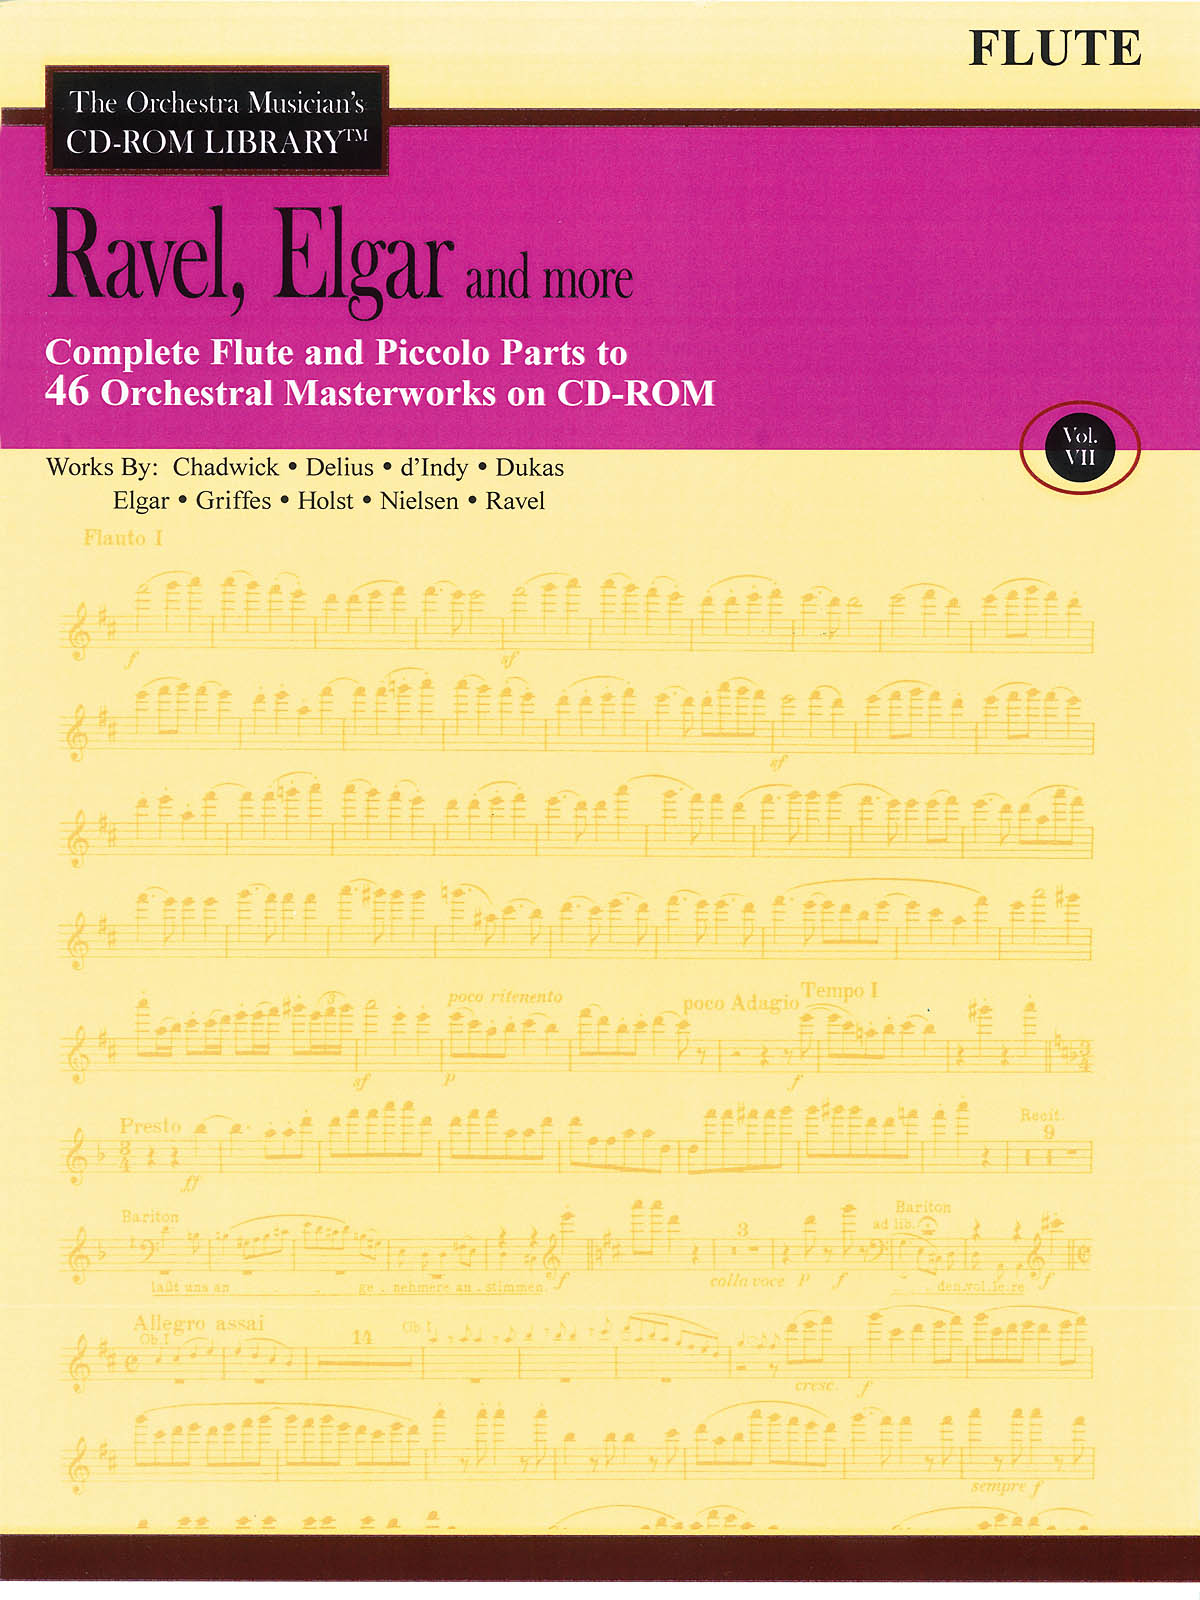 Ravel, Elgar and More – Volume 7(The Orchestra Musician’s CD-ROM Library – Flute)